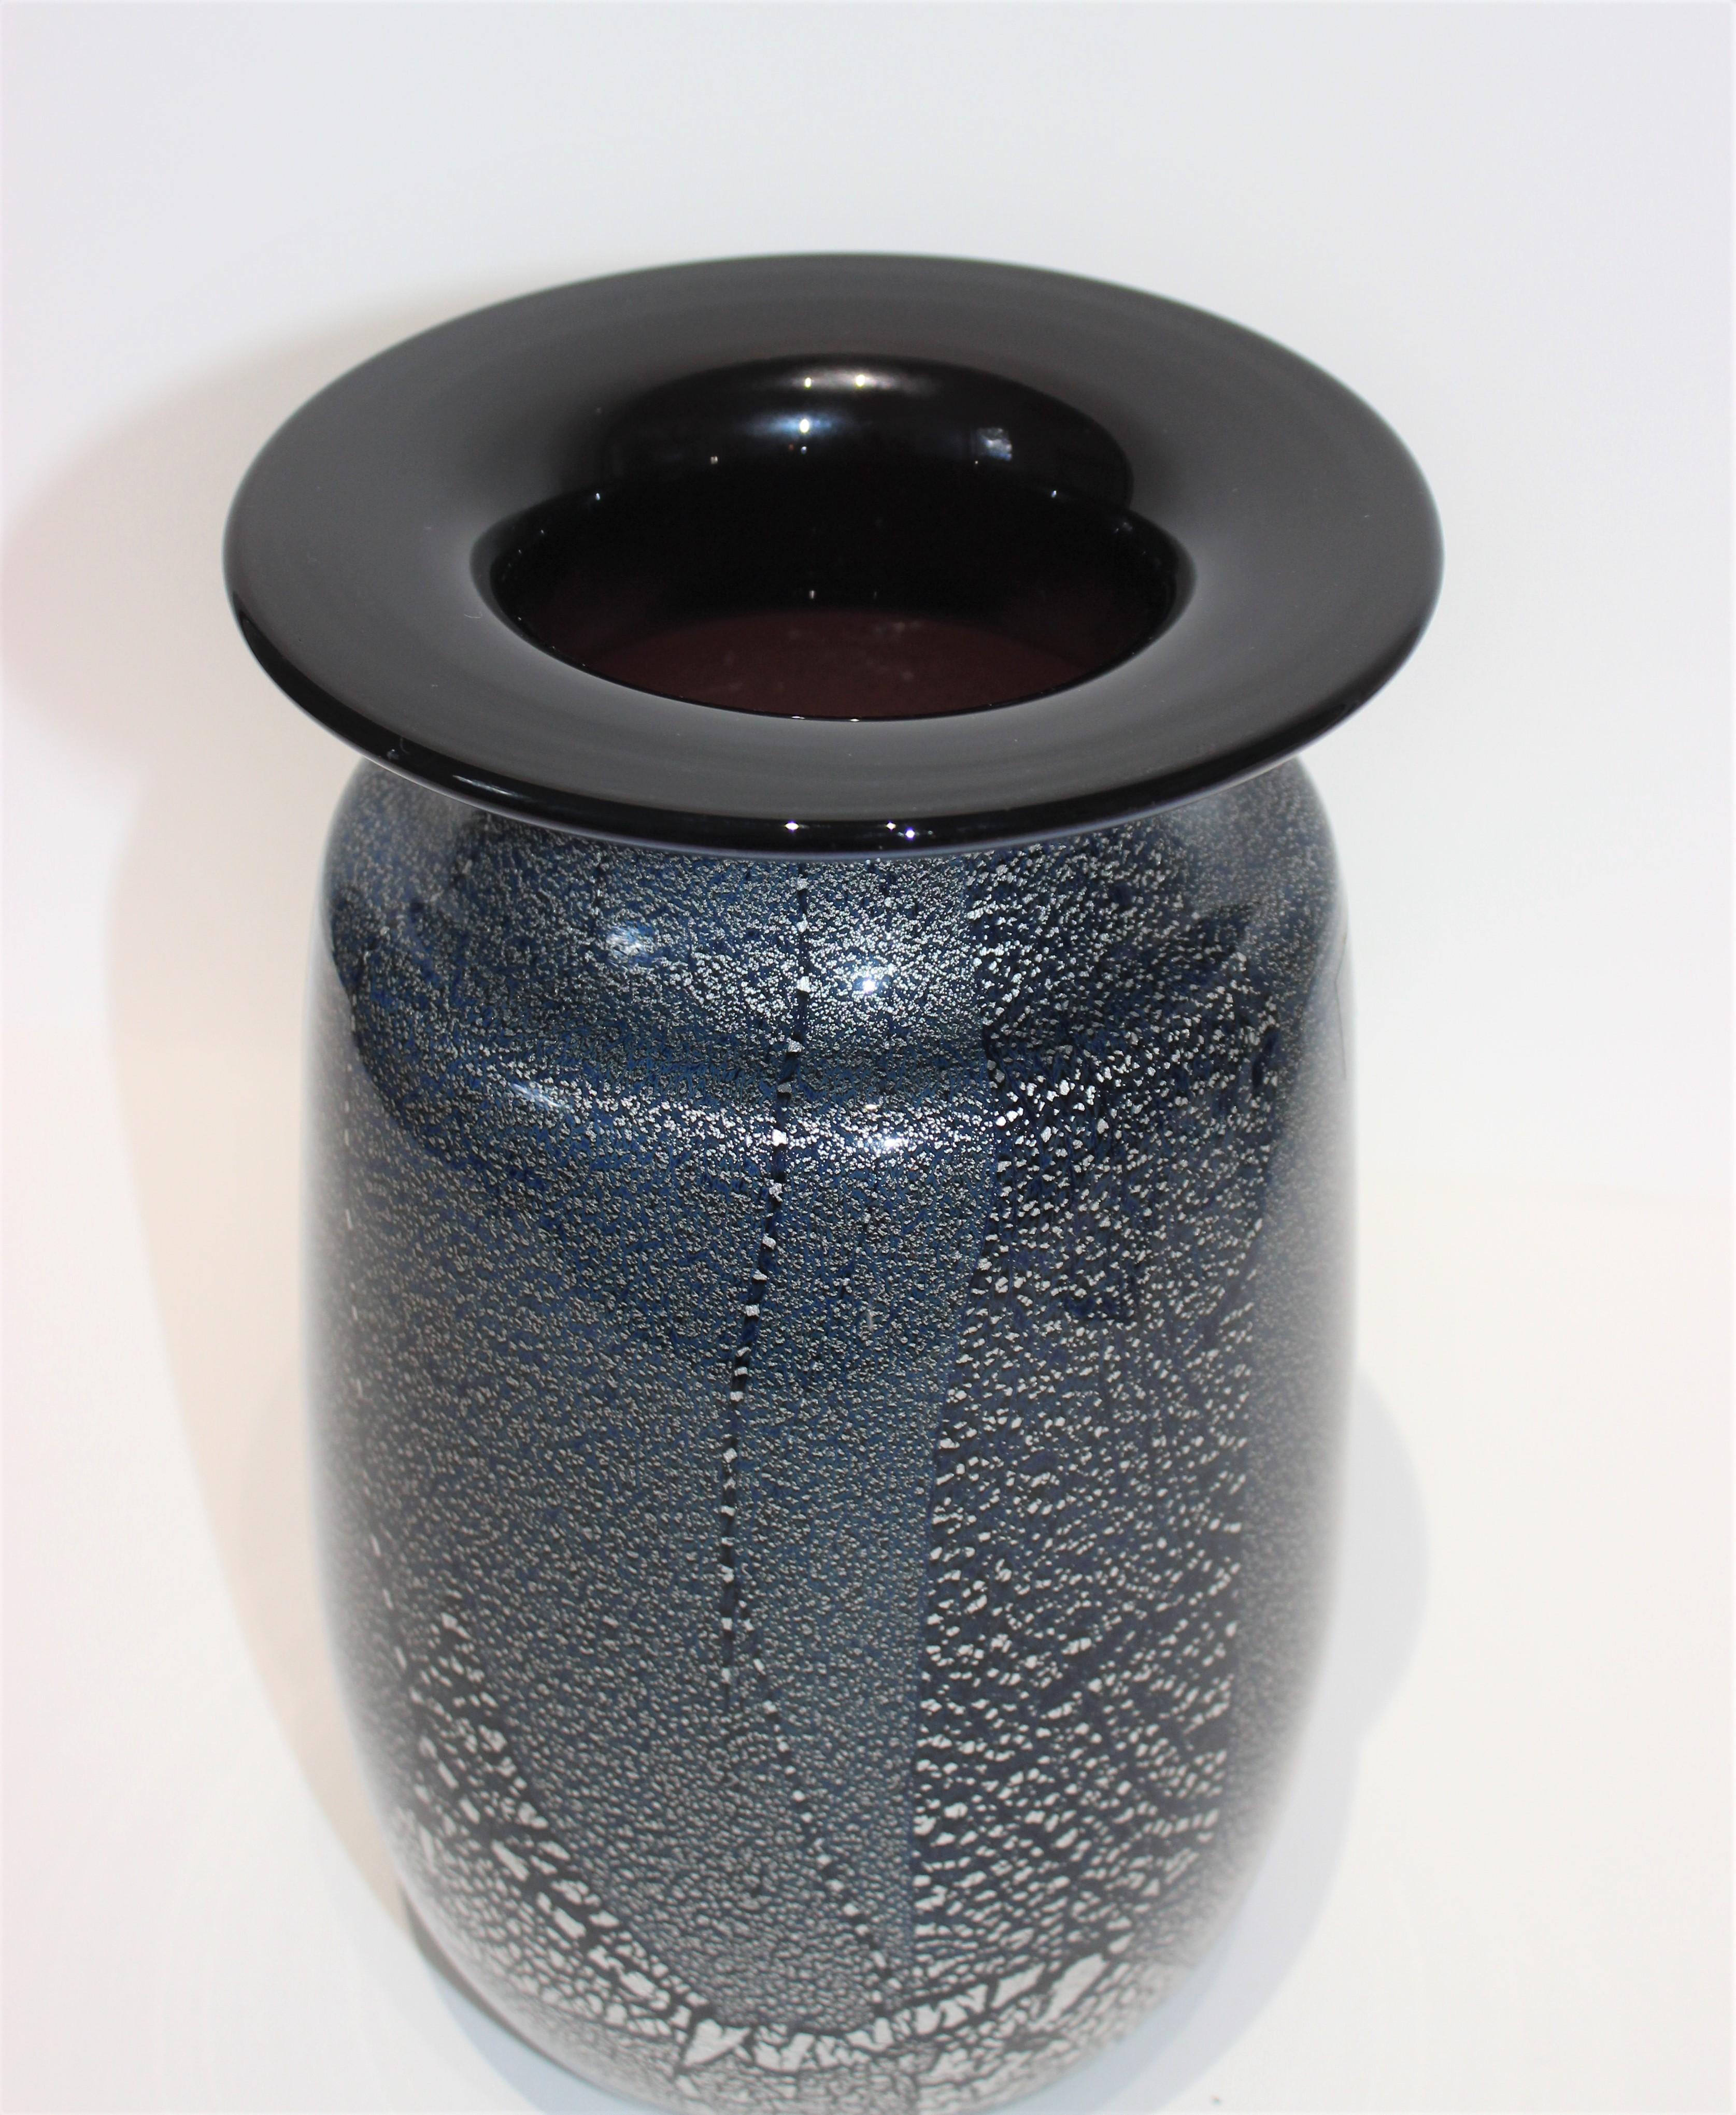 Gorgeous black and silver Murano glass vase designed by Larry Laslo for Mikasa.